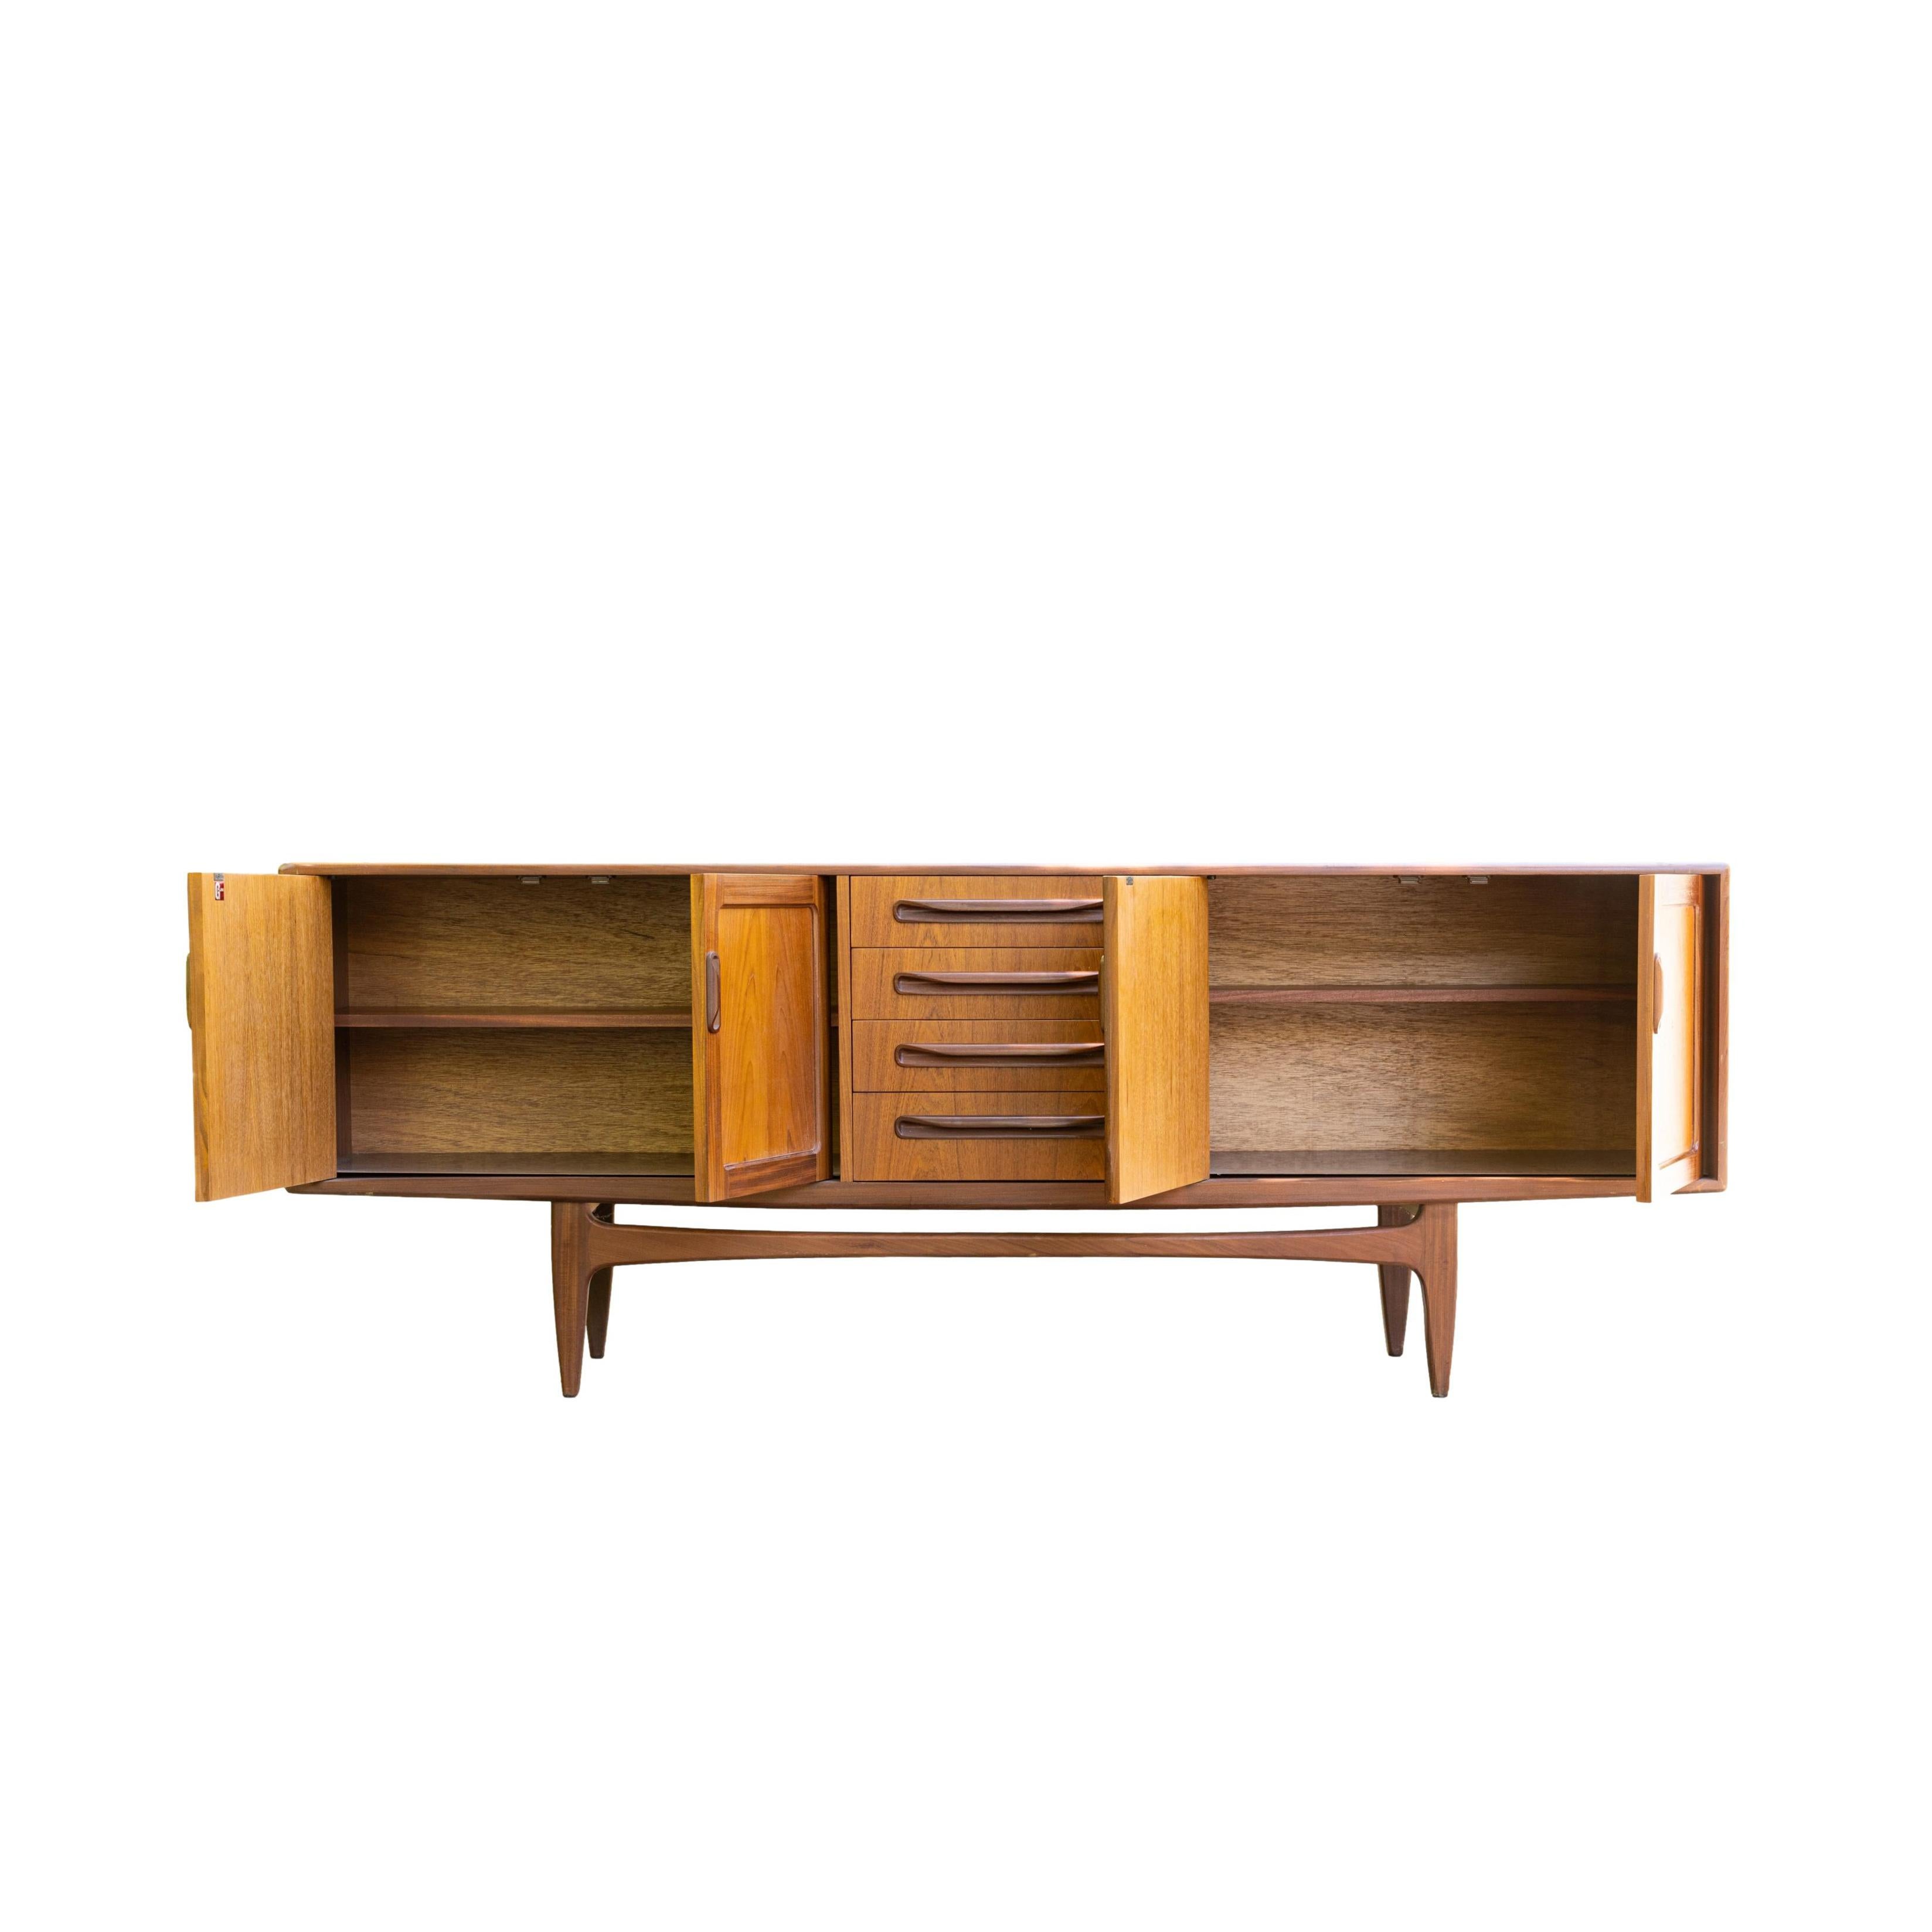 Mid-Century Modern teak sideboard designed by Victor Wilkins for G-Plan, in solid teak and afrormosia teak on ‘Floating Base,’ with extensively fitted interior. Built to the highest standards, the piece exudes quality, beauty and style. Highly